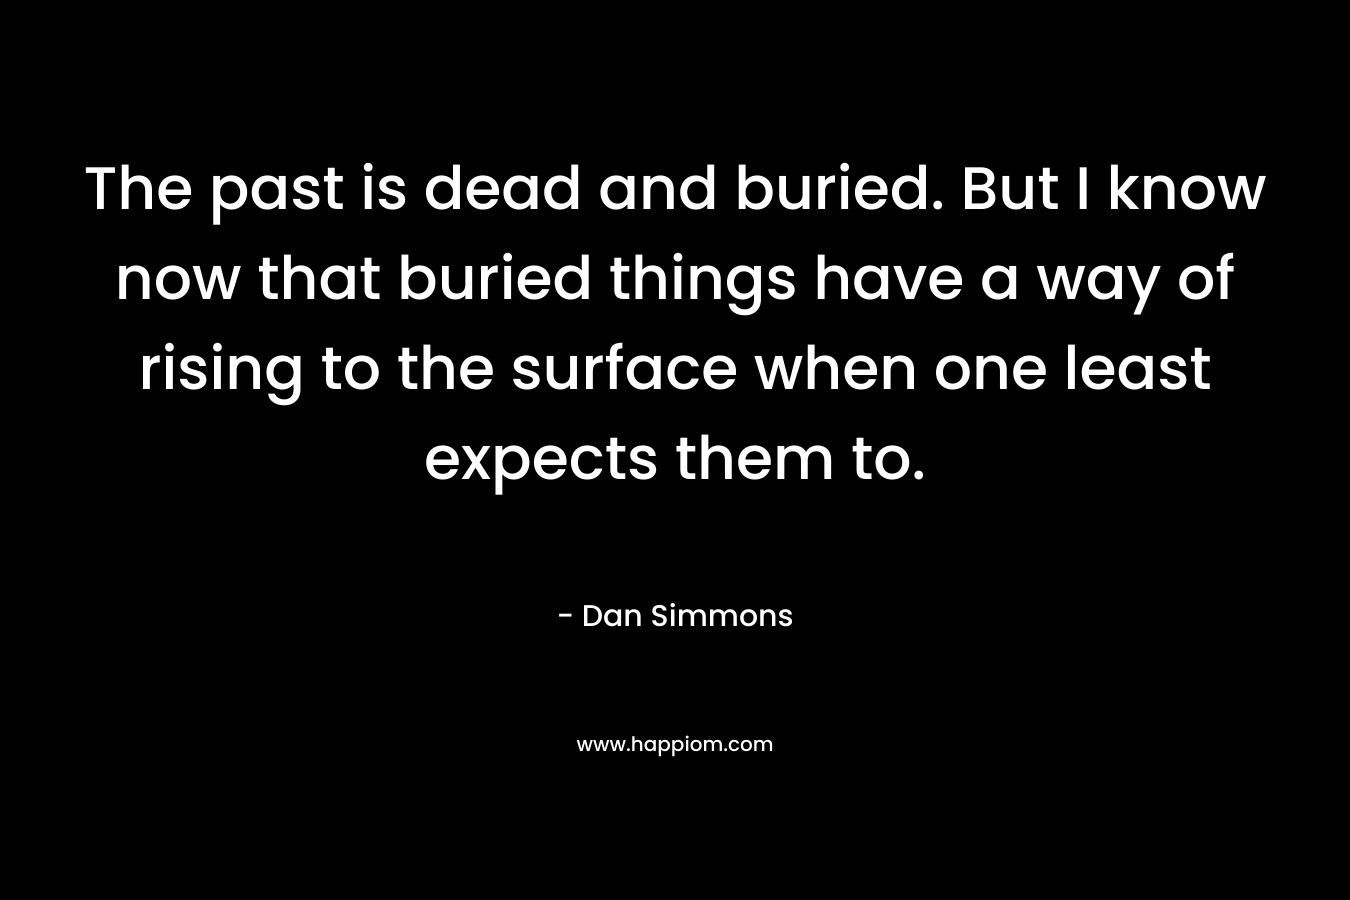 The past is dead and buried. But I know now that buried things have a way of rising to the surface when one least expects them to. – Dan Simmons